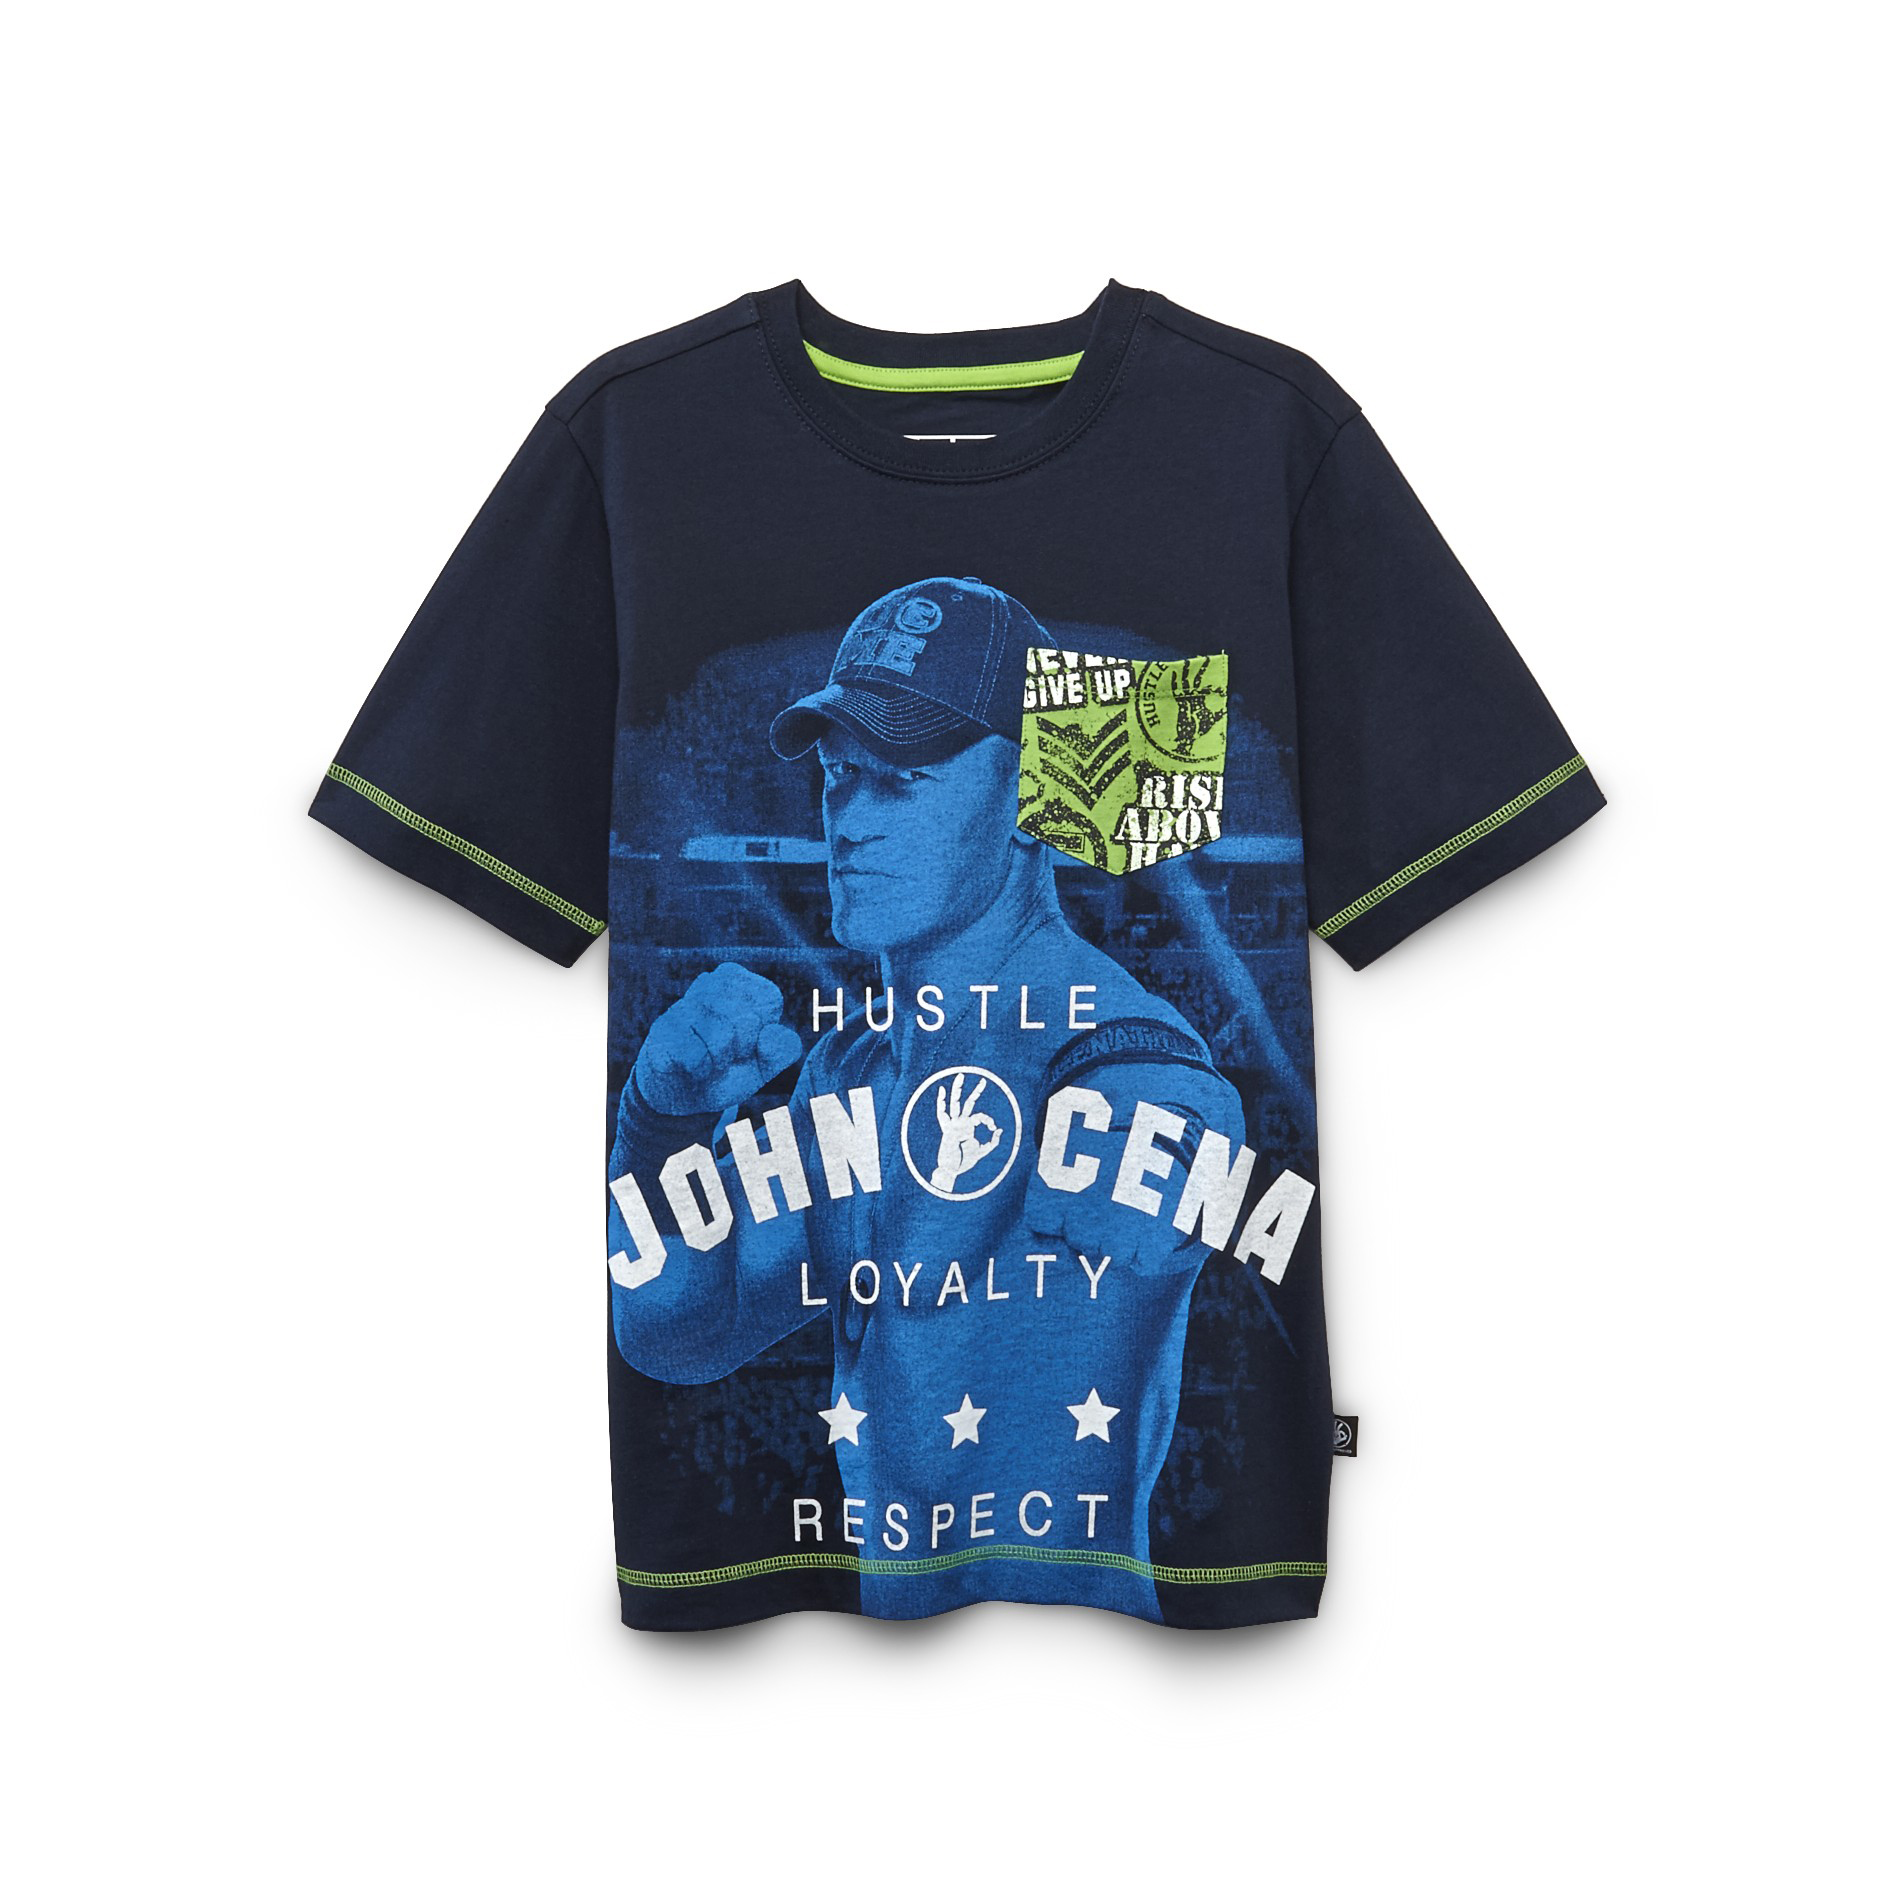 Never Give Up By John Cena Boy's Graphic Pocket T-shirt